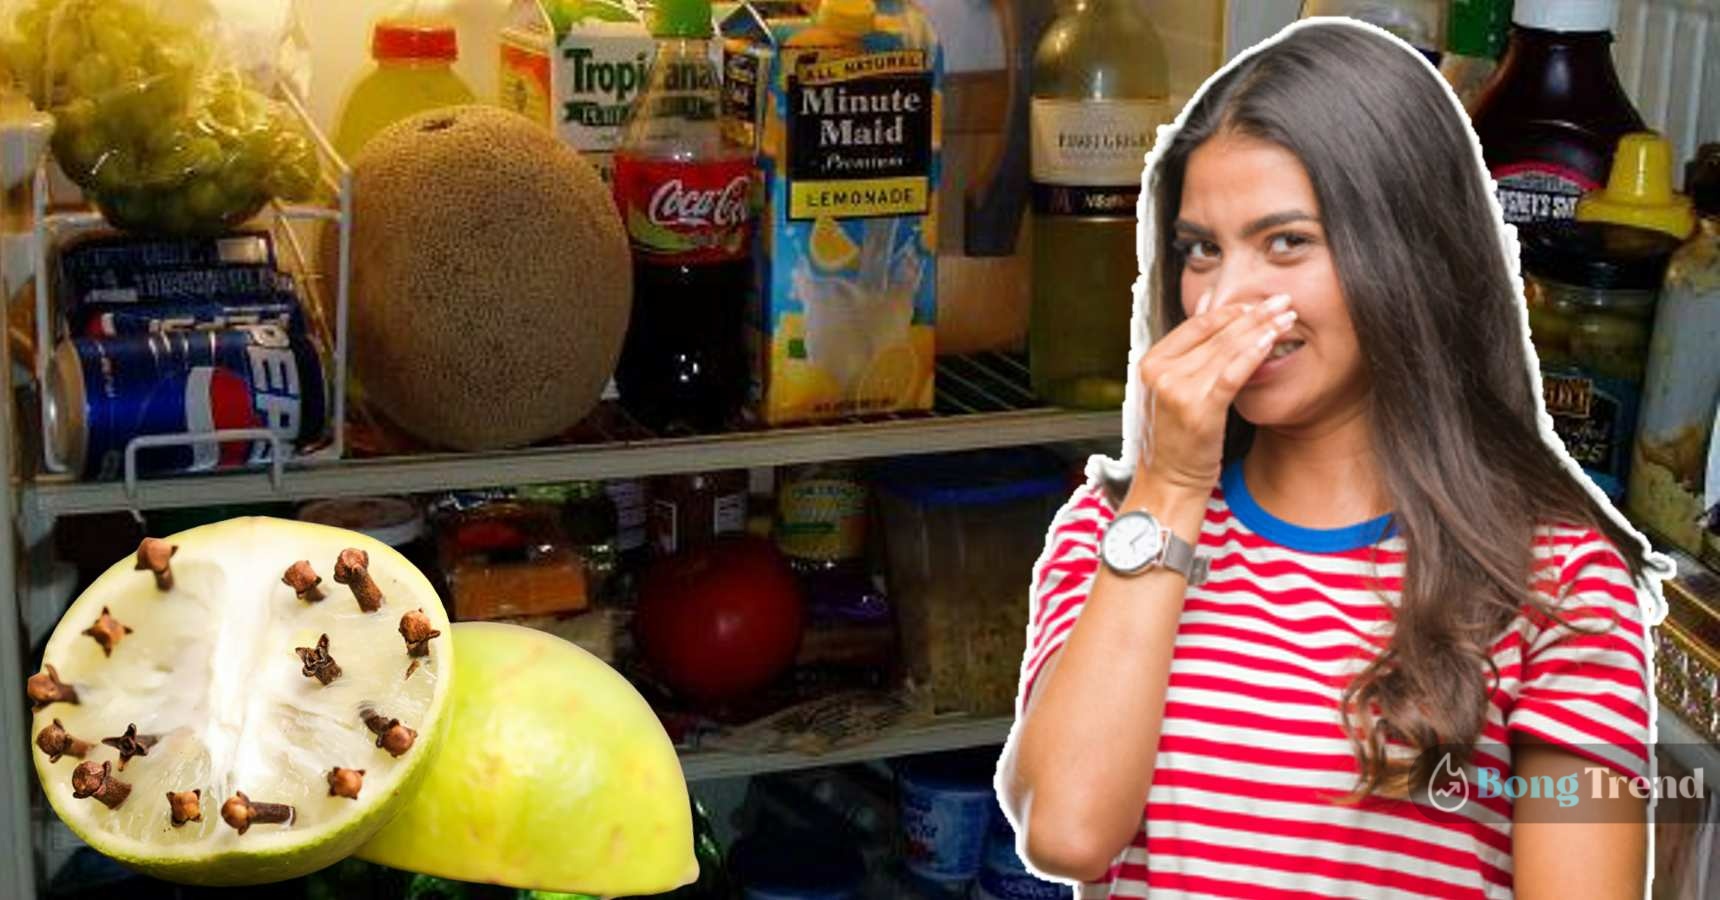 How to remove bad smell from fridge working tips